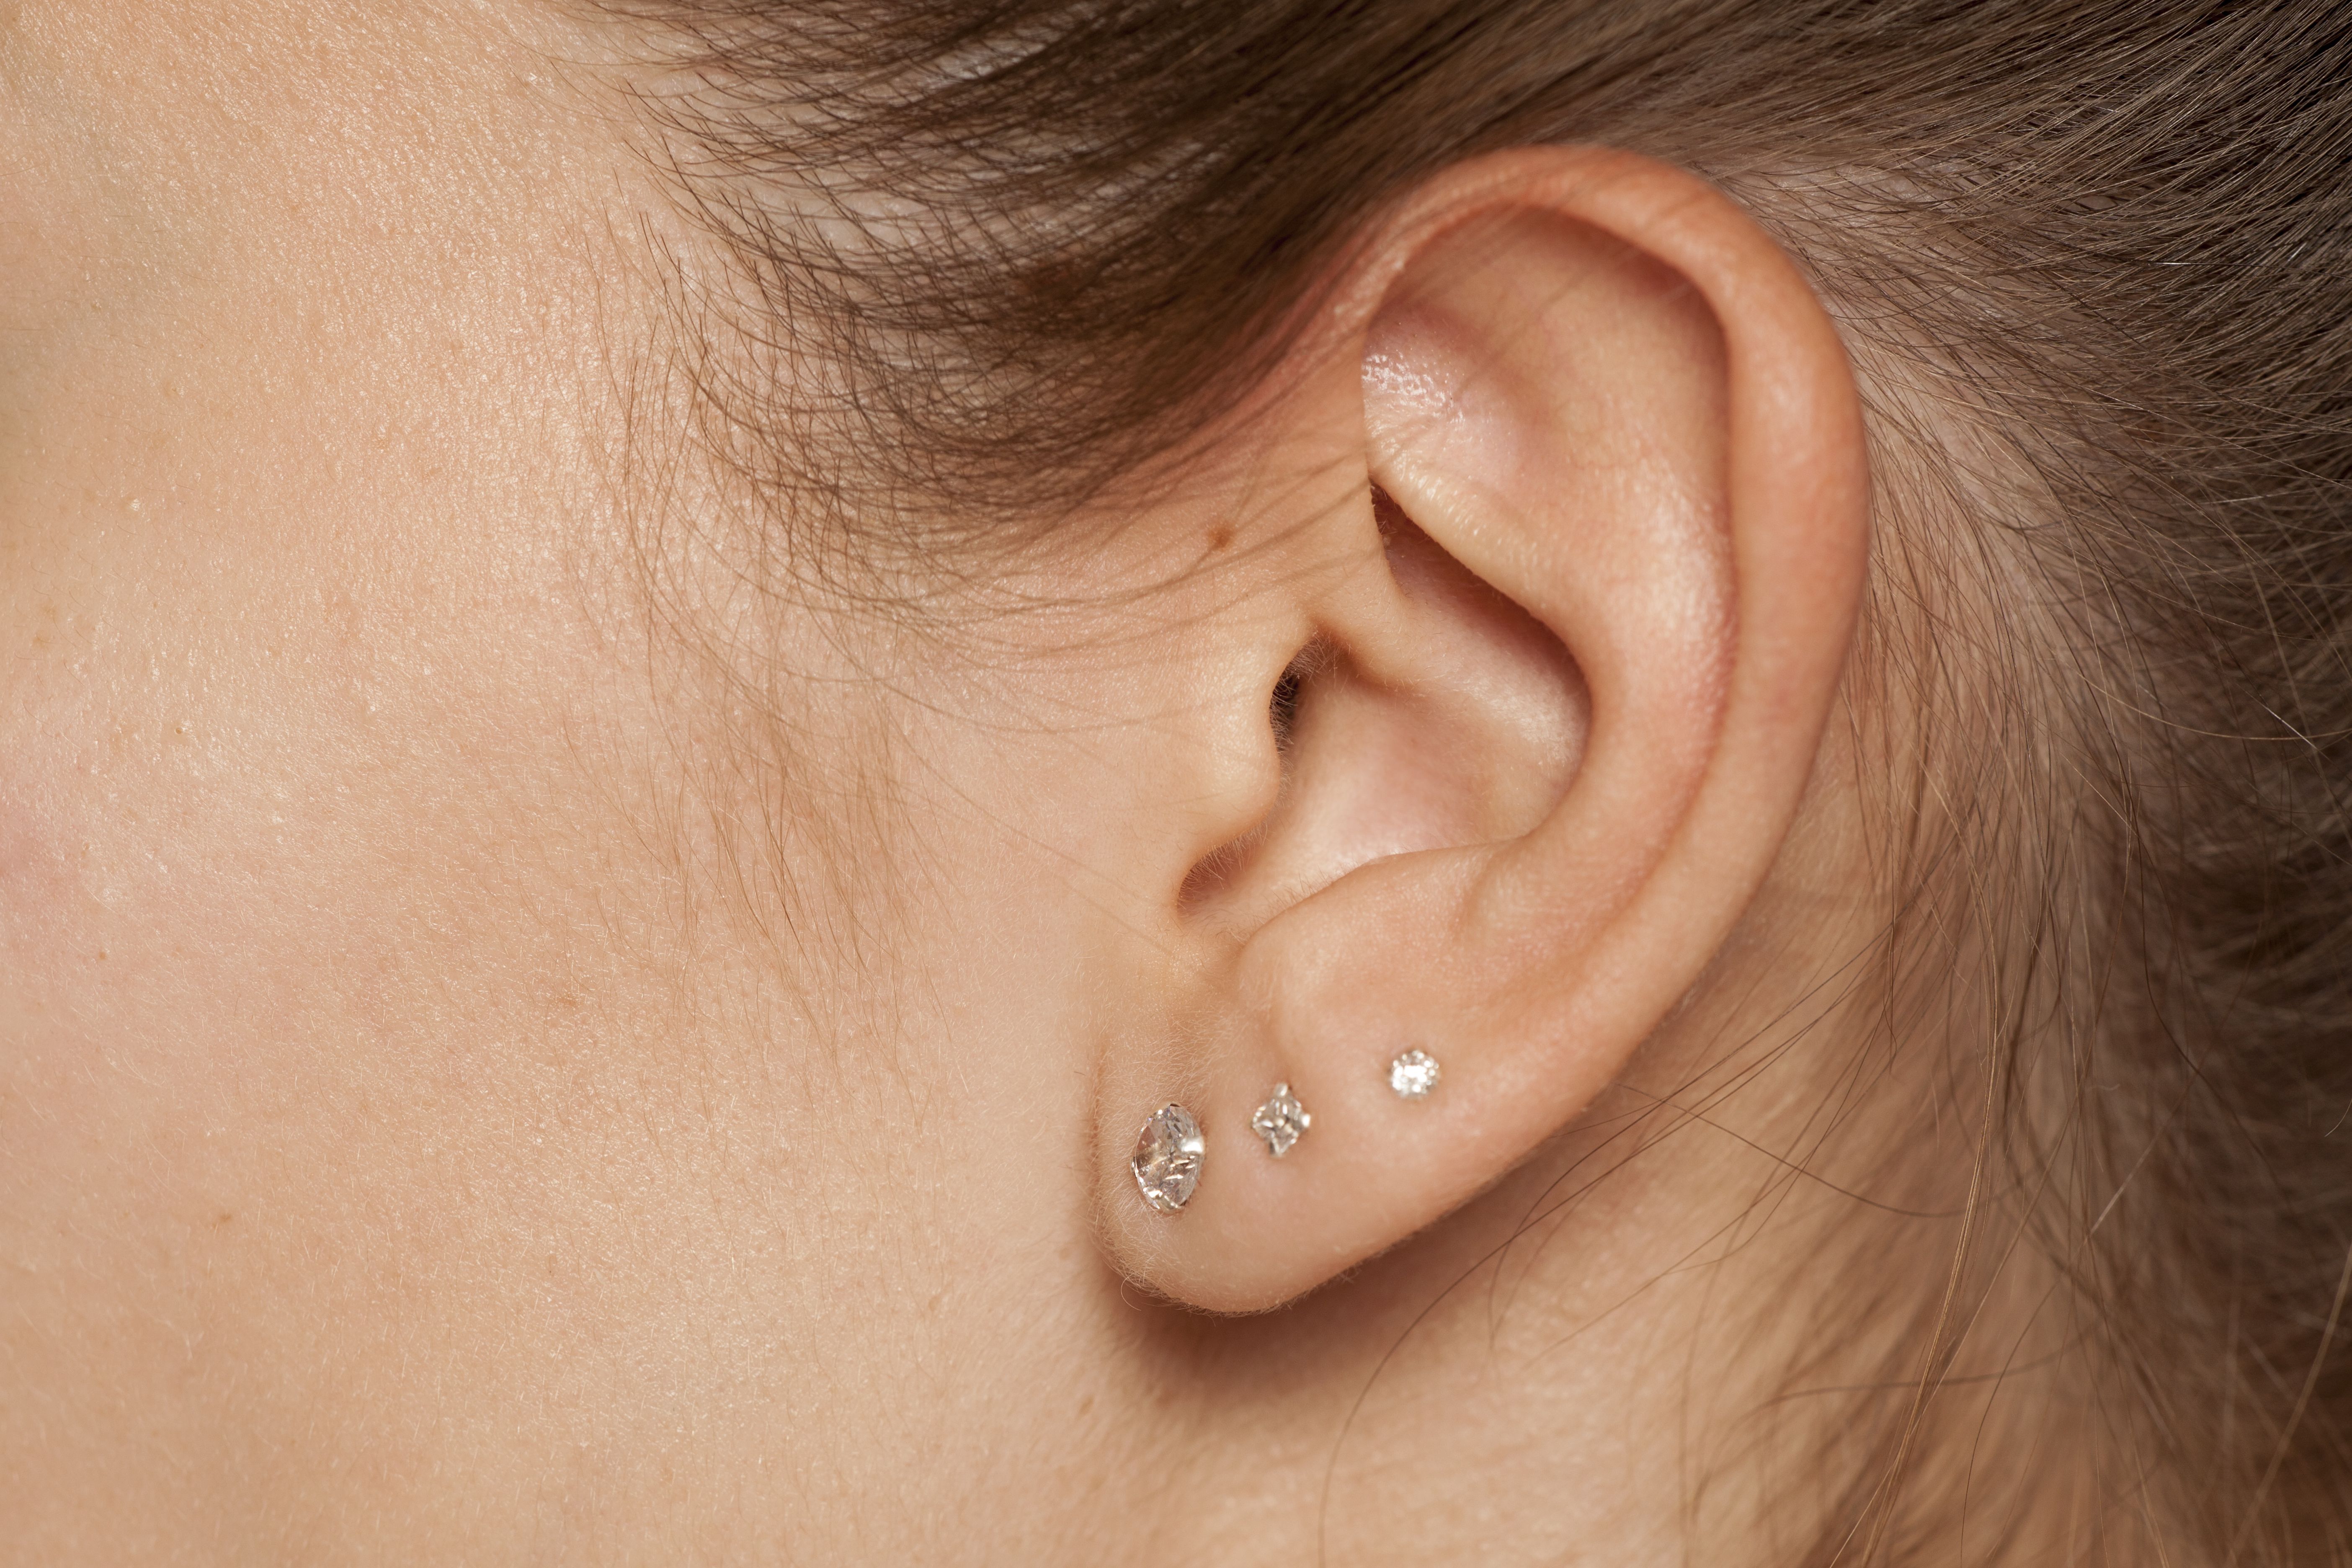 what causes fat earlobes